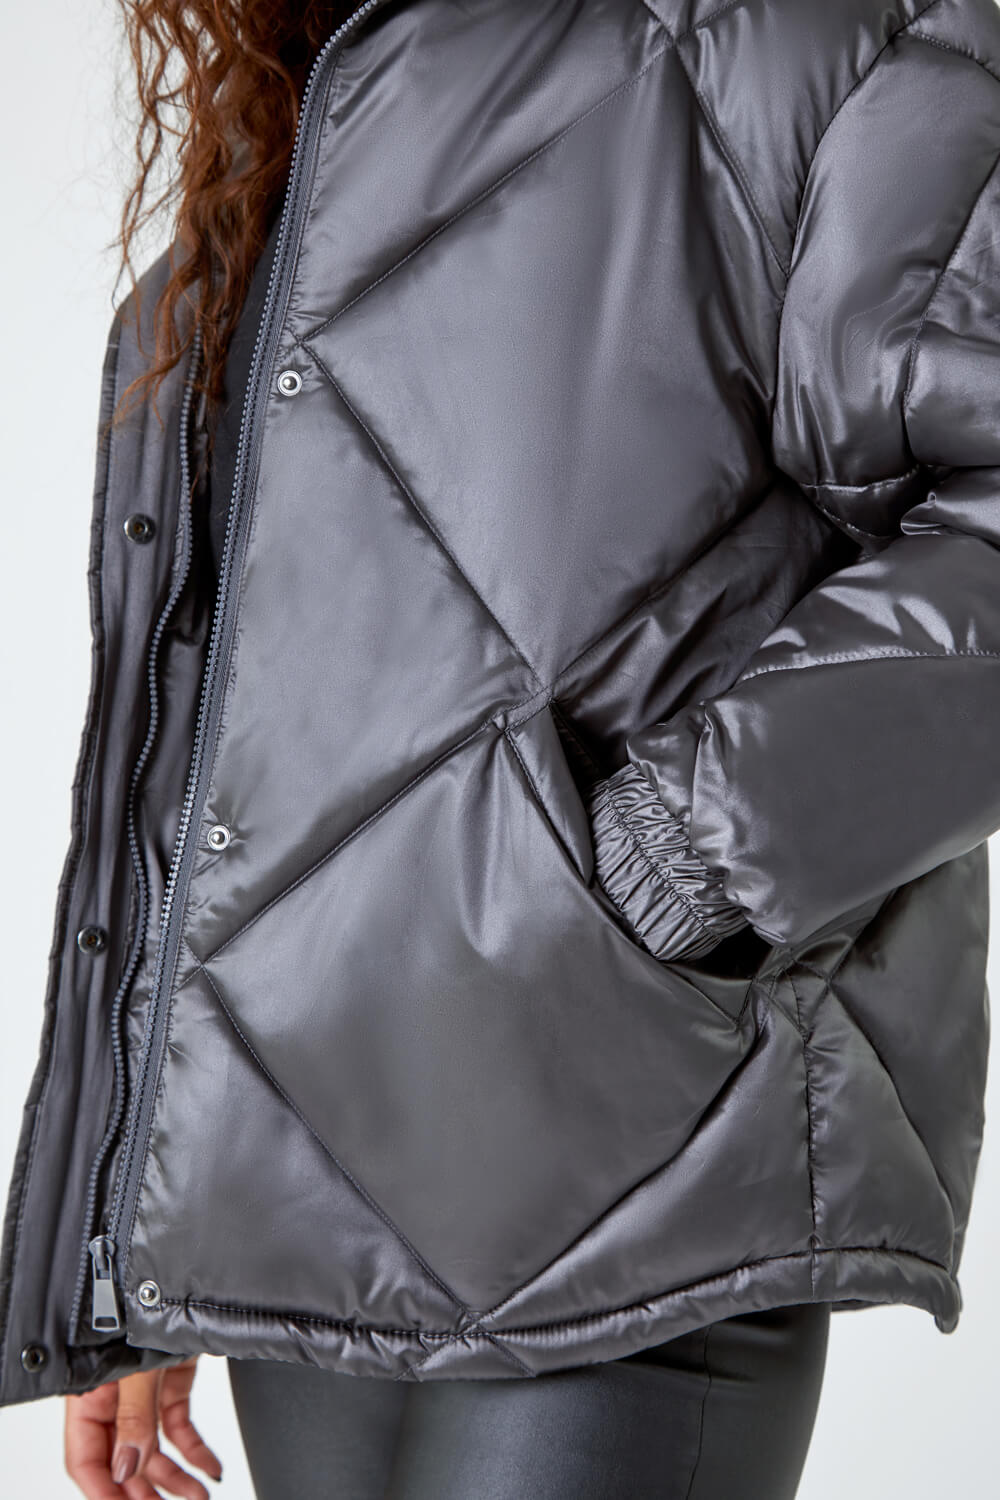 Ash Diamond Quilted Puffer Coat, Image 5 of 5